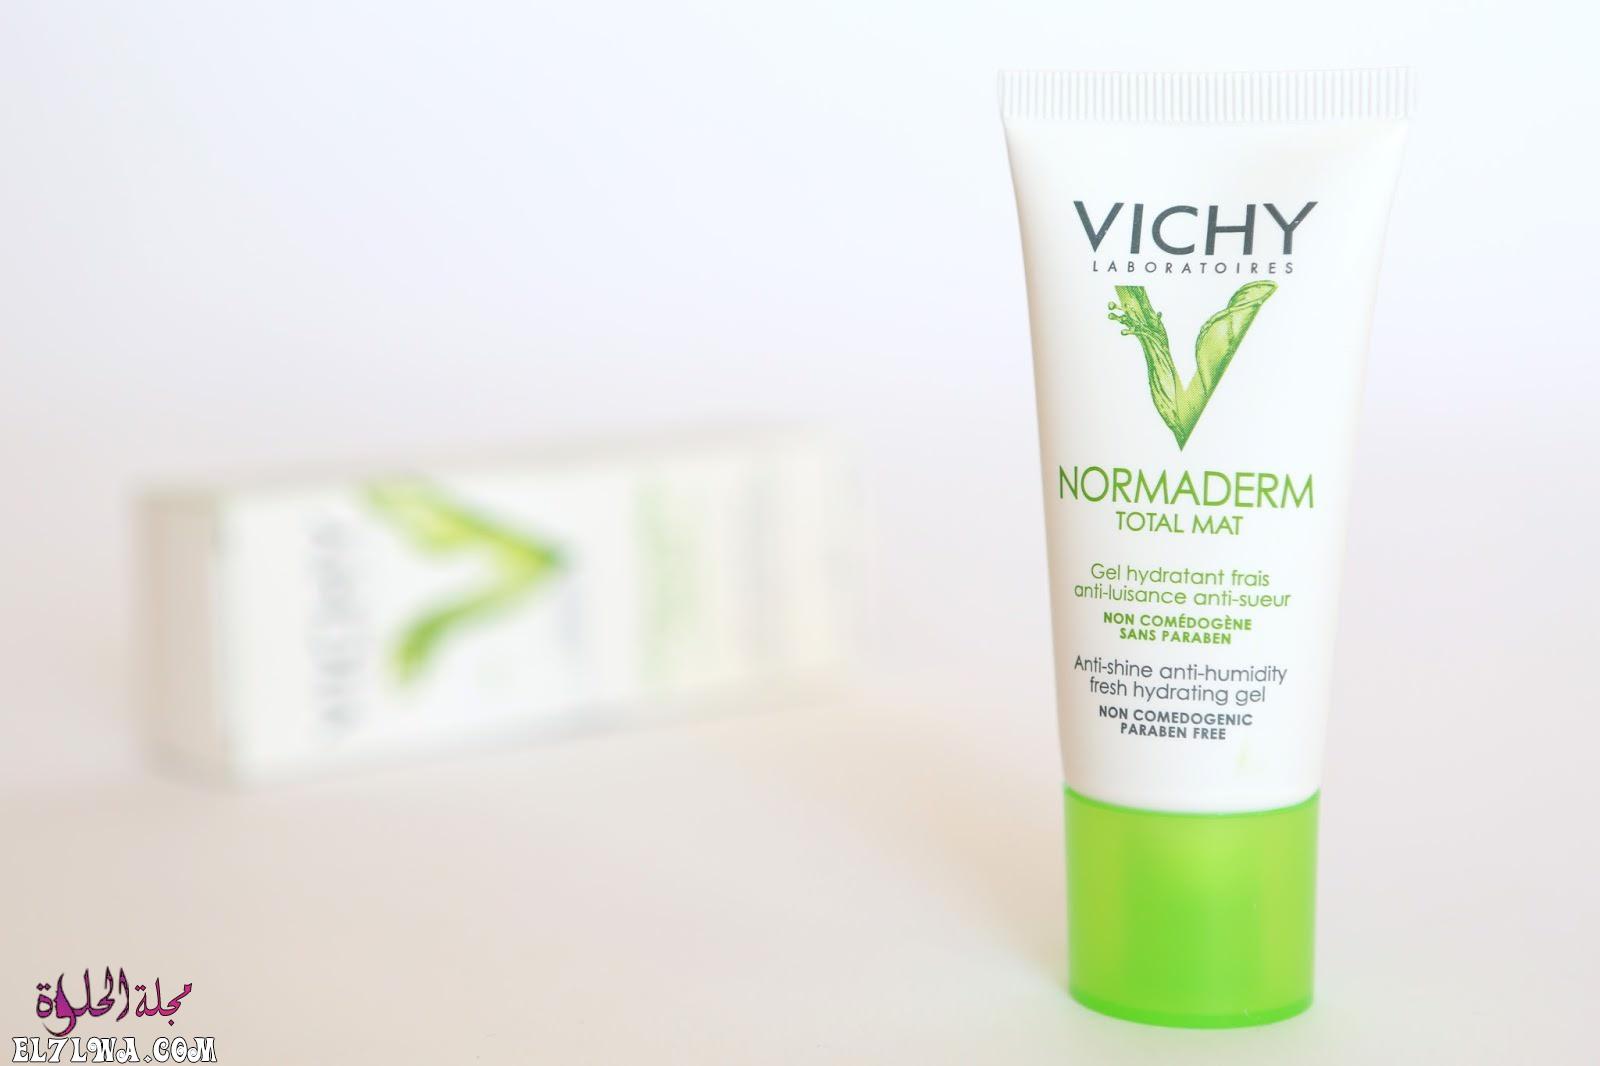 Vichy Normaderm Total Mat